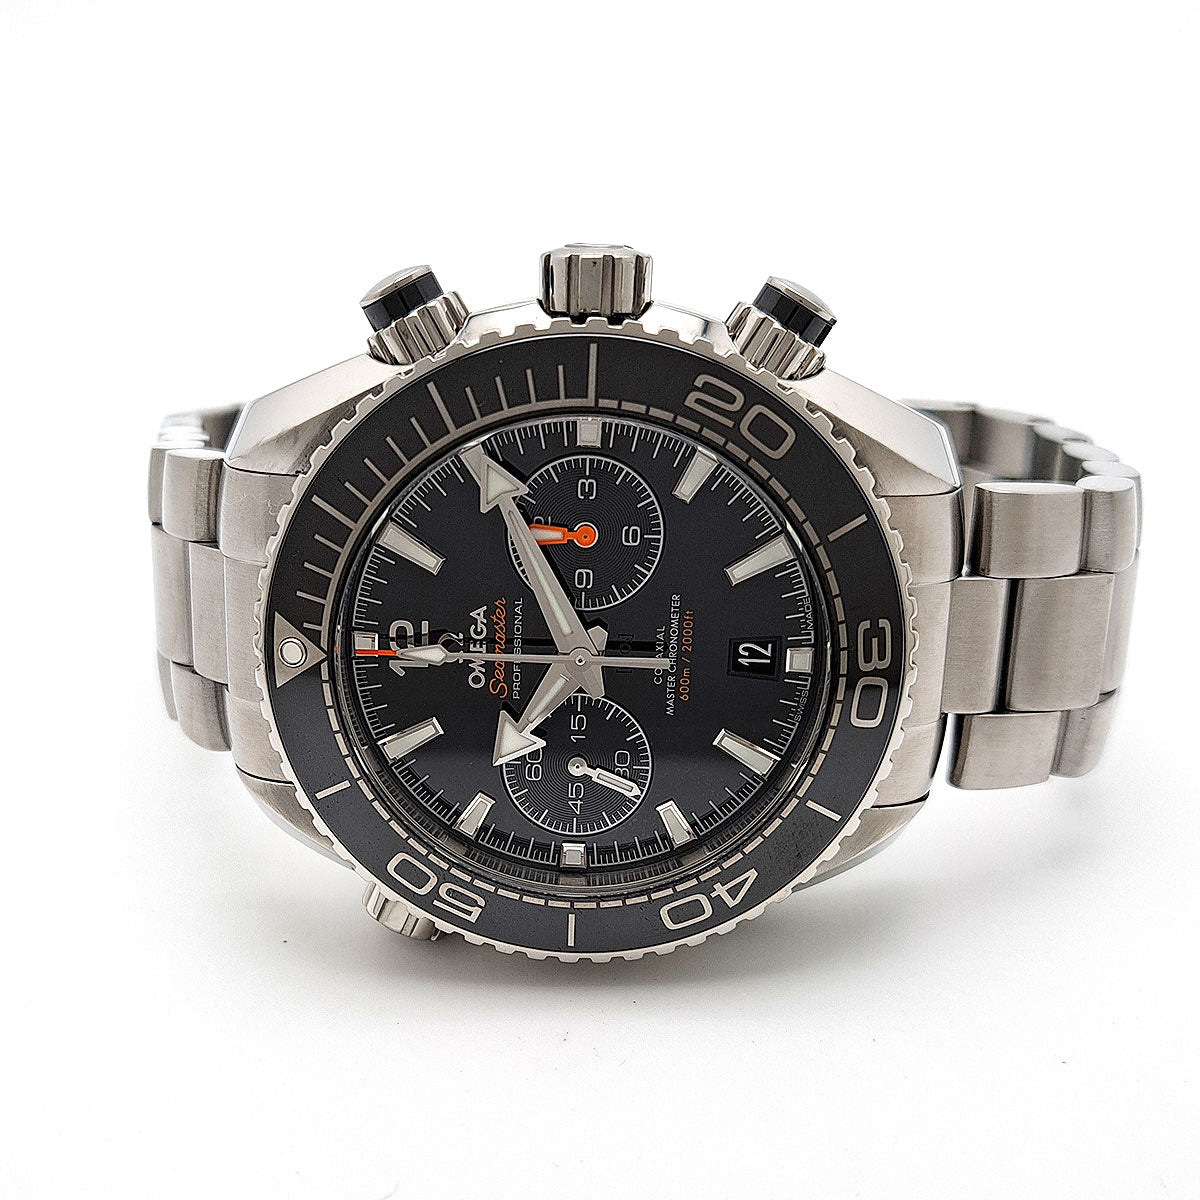 OMEGA Seamaster Planet Ocean Chronograph 215.30.46.51.01.001 Automatic Stainless Steel Men’s Pre-owned Watch 215.30.46.51.01.001